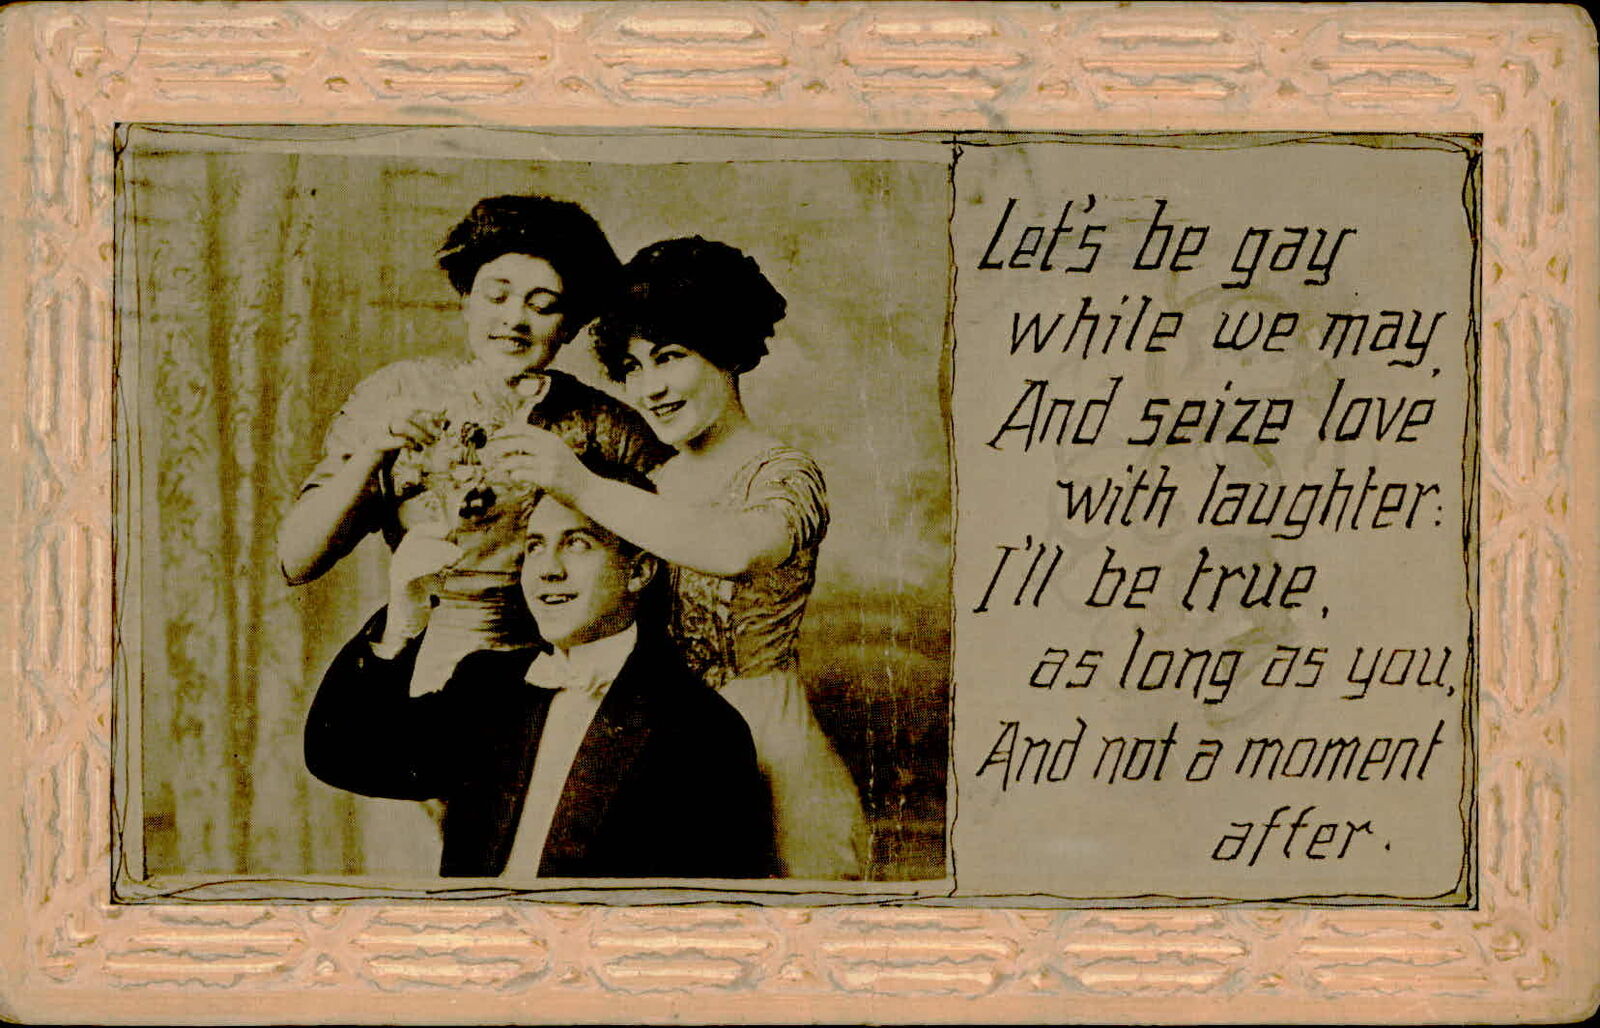 Postcard: Let's be gay while we may And seize love with laughter: I'll